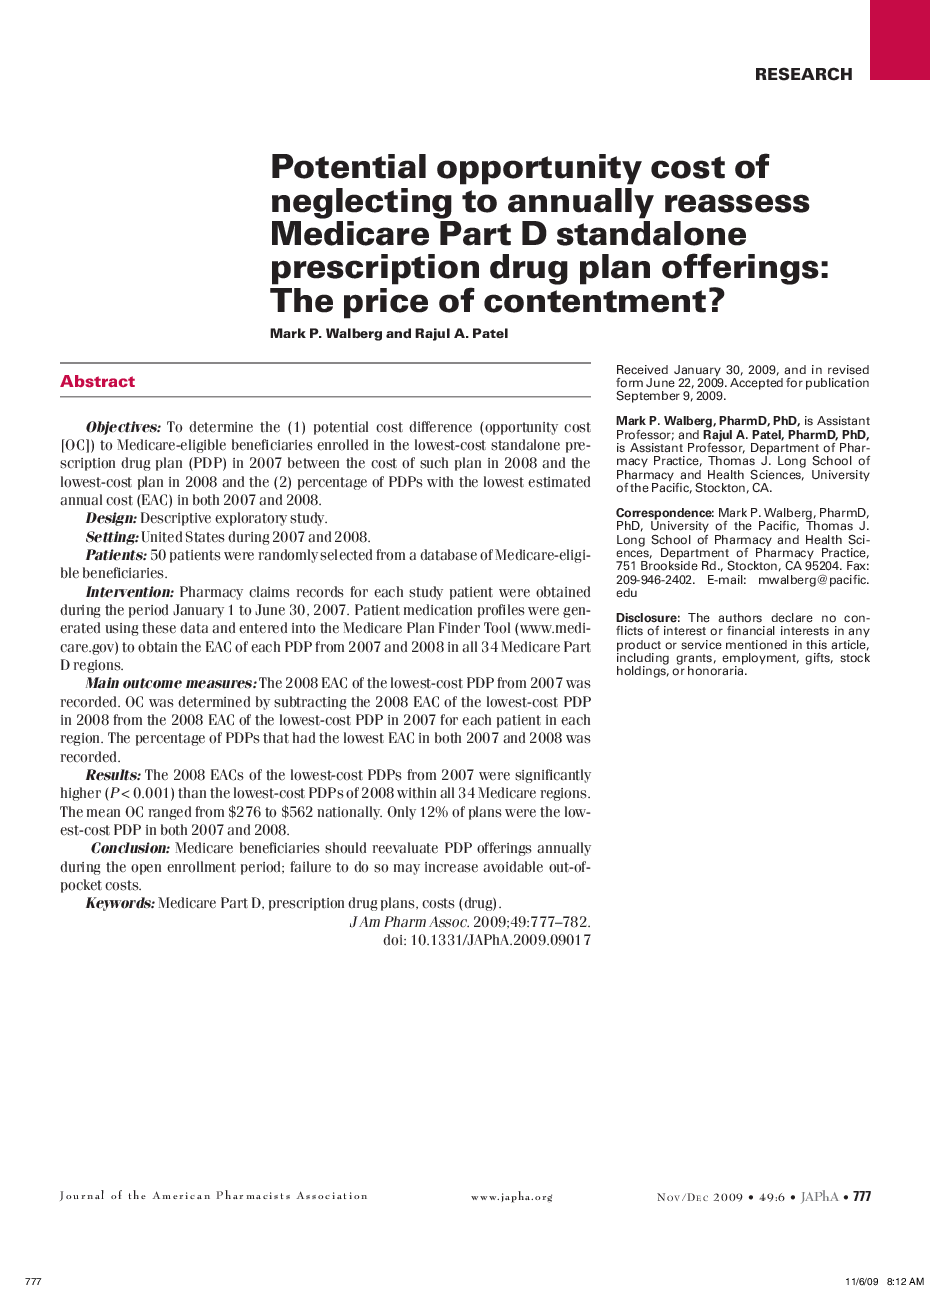 Potential opportunity cost of neglecting to annually reassess Medicare Part D standalone prescription drug plan offerings: The price of contentment?